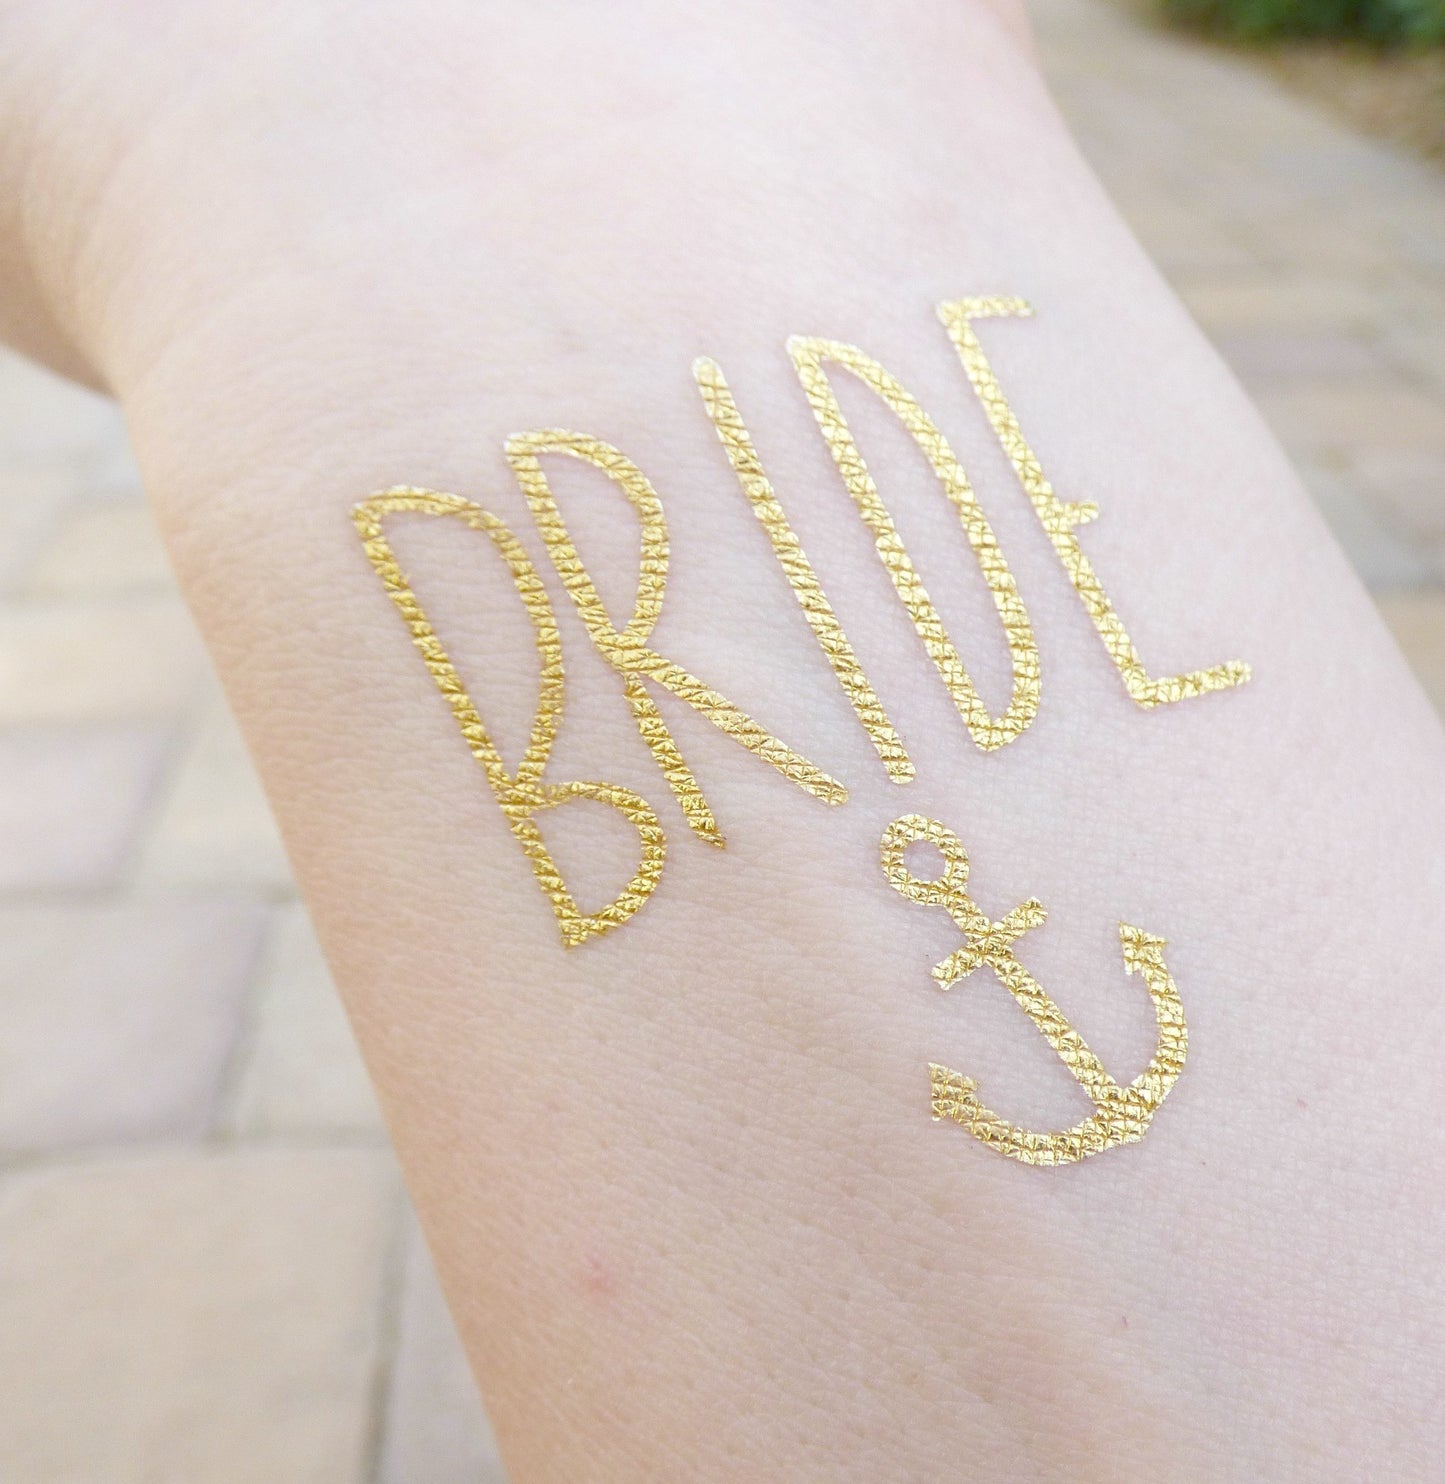 Bride Anchor temporary tattoo for bachelorette party